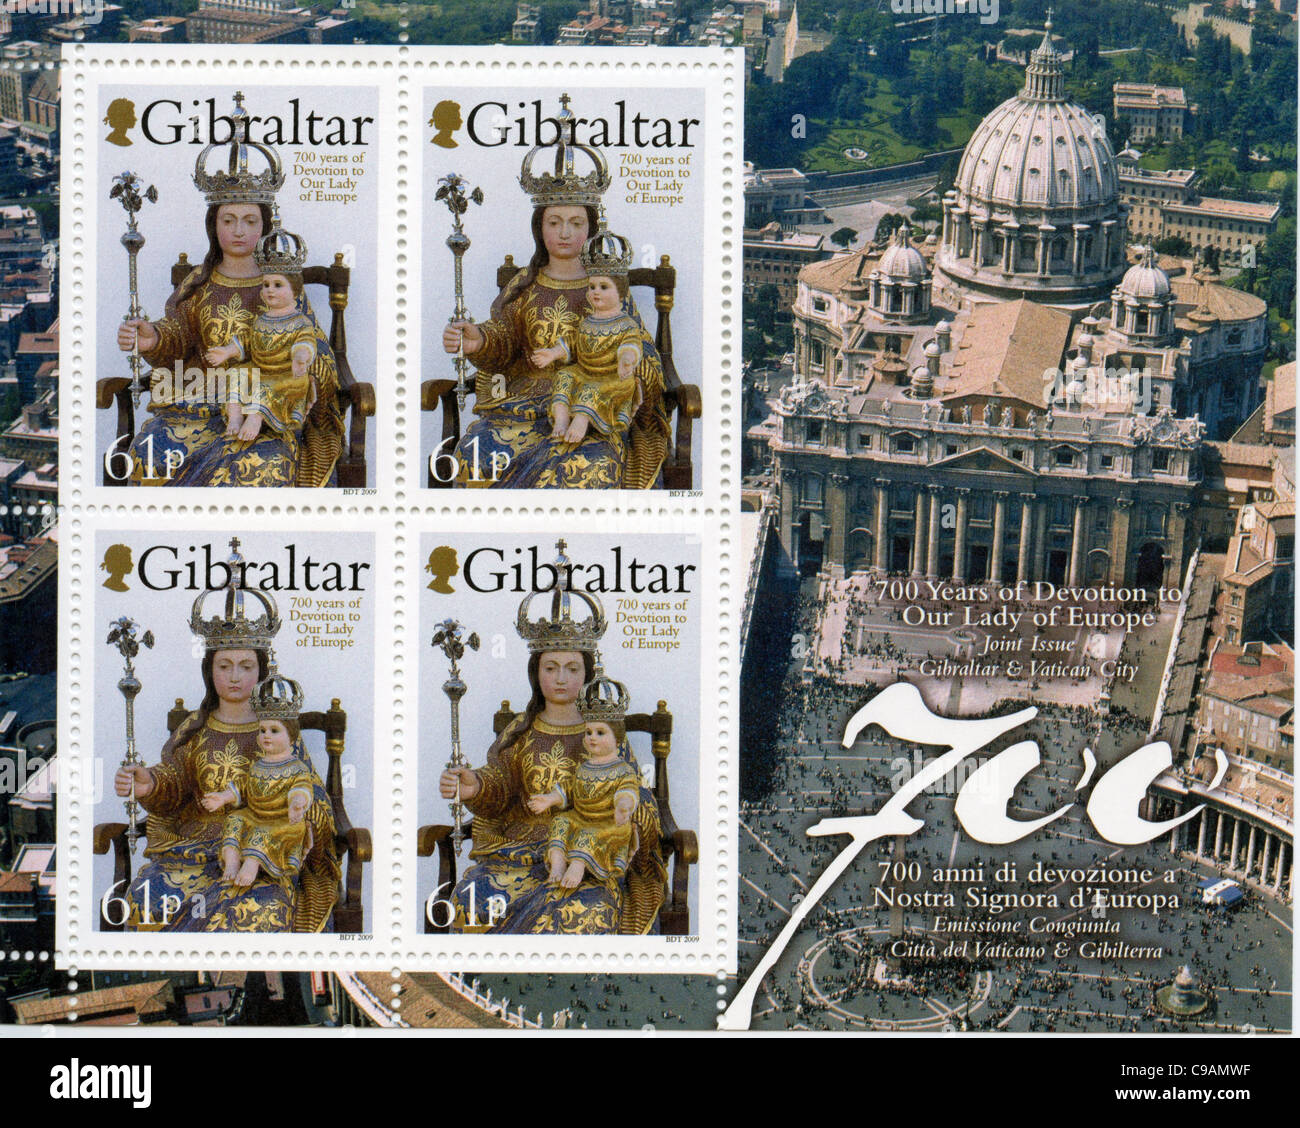 Gibraltar and Vatican joint issue postage stamps - 700 years of devotion to our lady of Europe Stock Photo